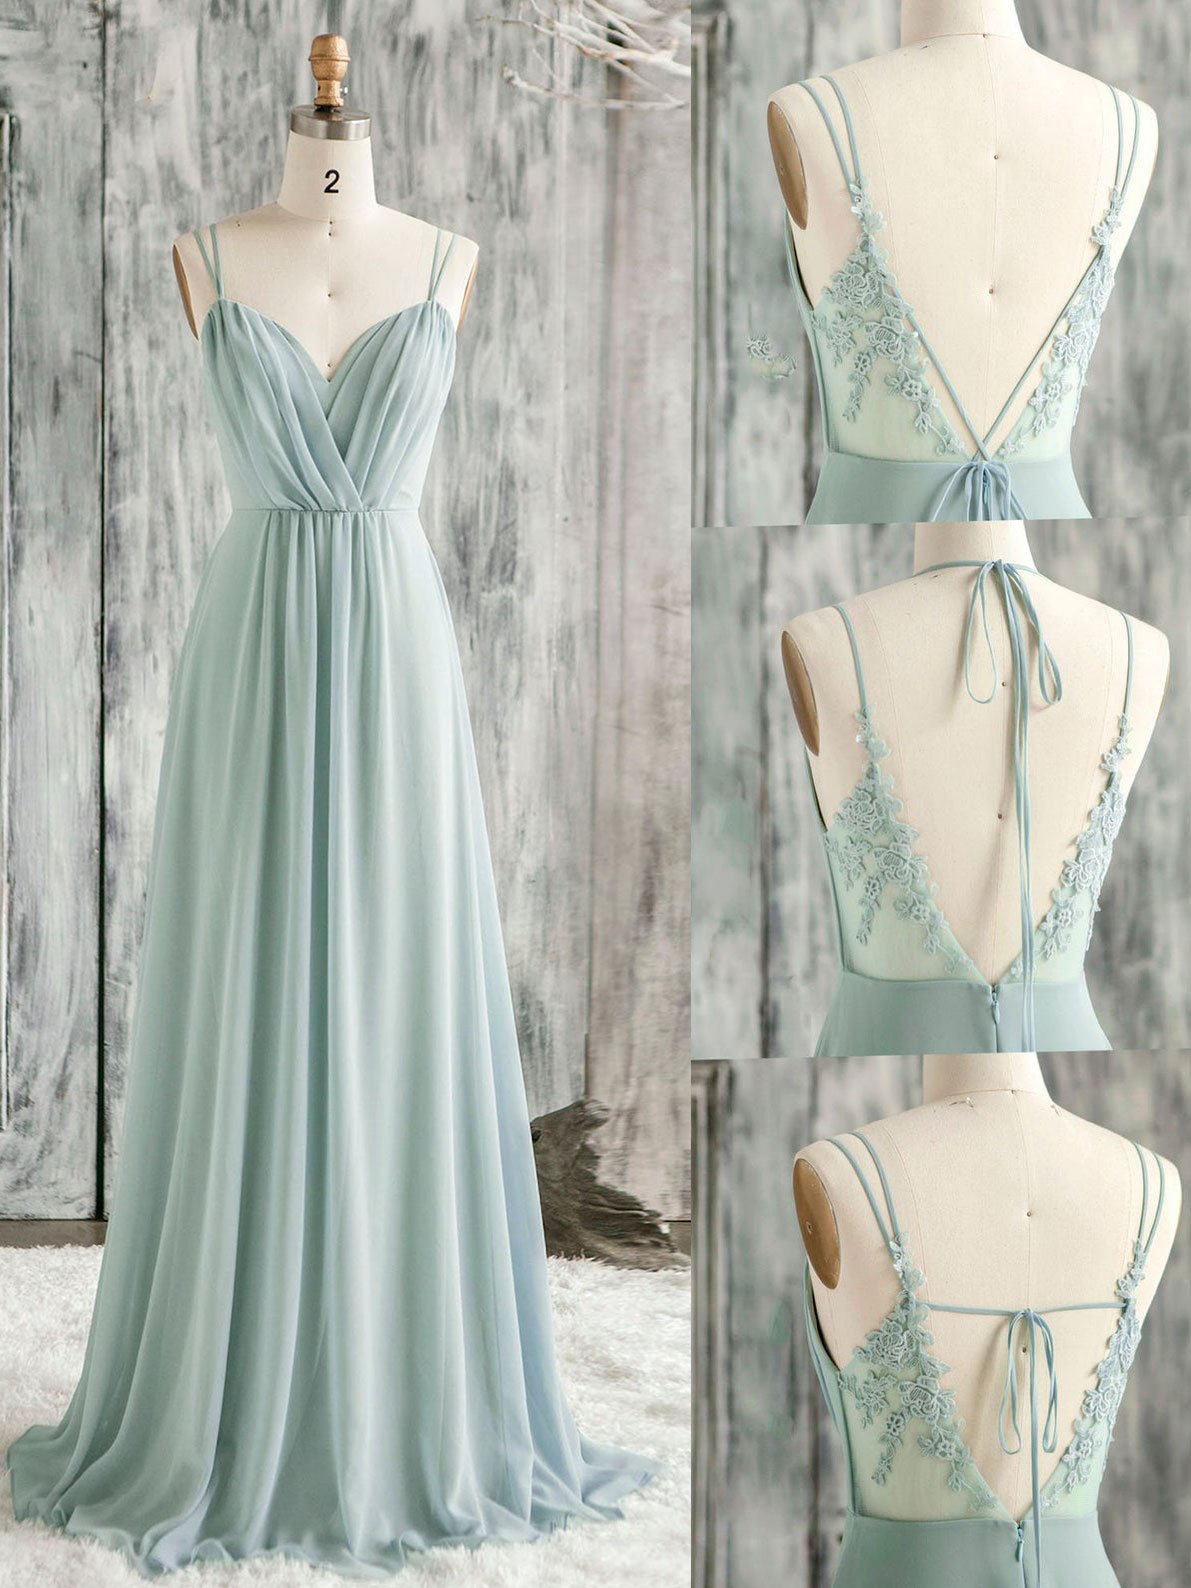 Green A line Chiffon Lace Long Prom Dress Outfits For Girls, Lace Bridesmaid Dress